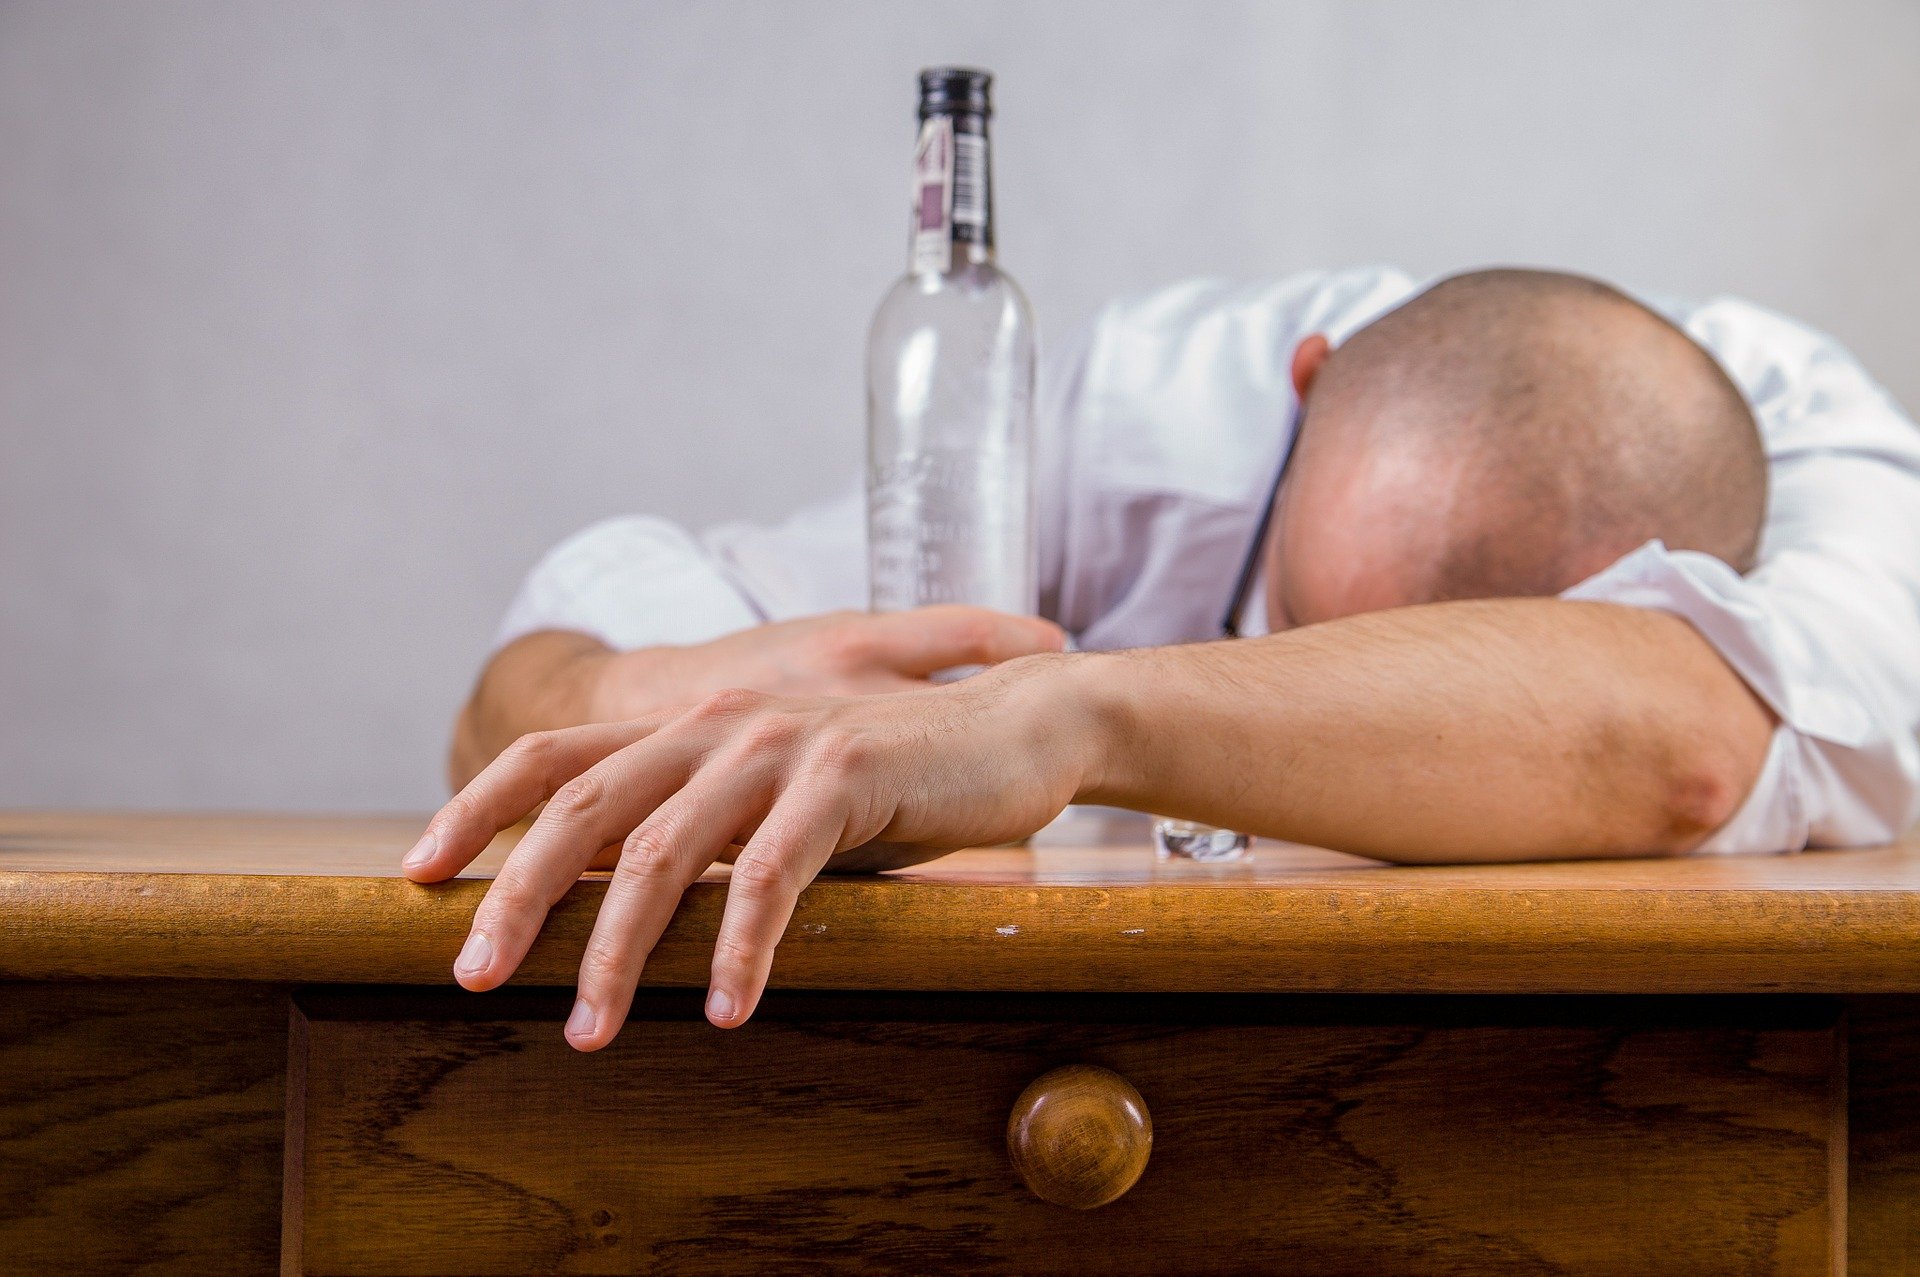 A drunk man lying on a table sleeping while holding on to an alcohol bottle | Photo: Pixabay/Michal Jarmoluk